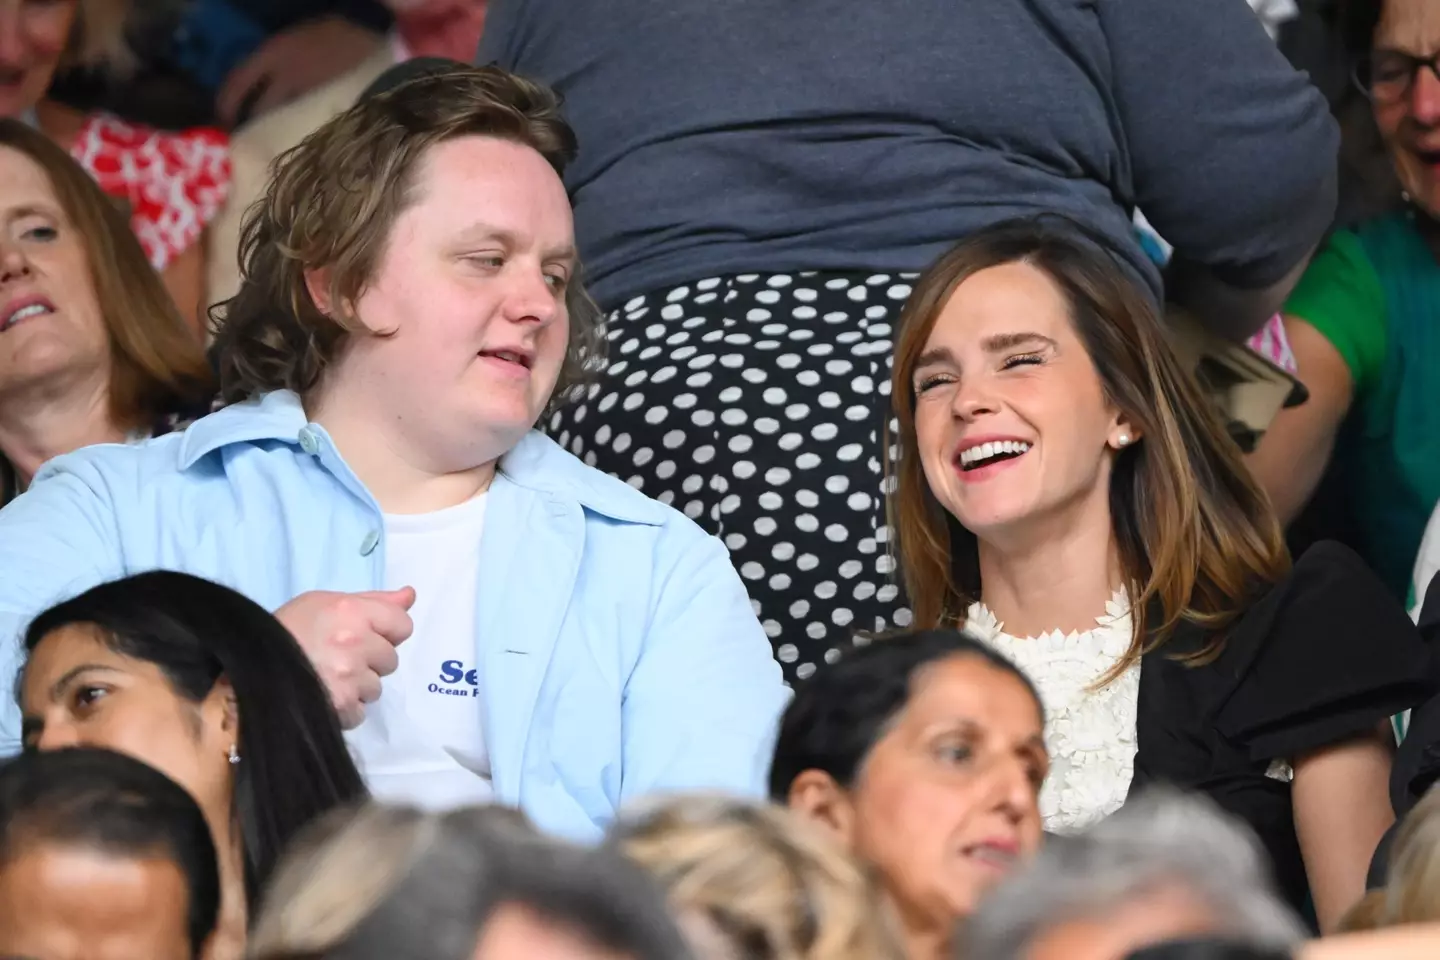 Lewis Capaldi and Emma Watson were laughing away together.